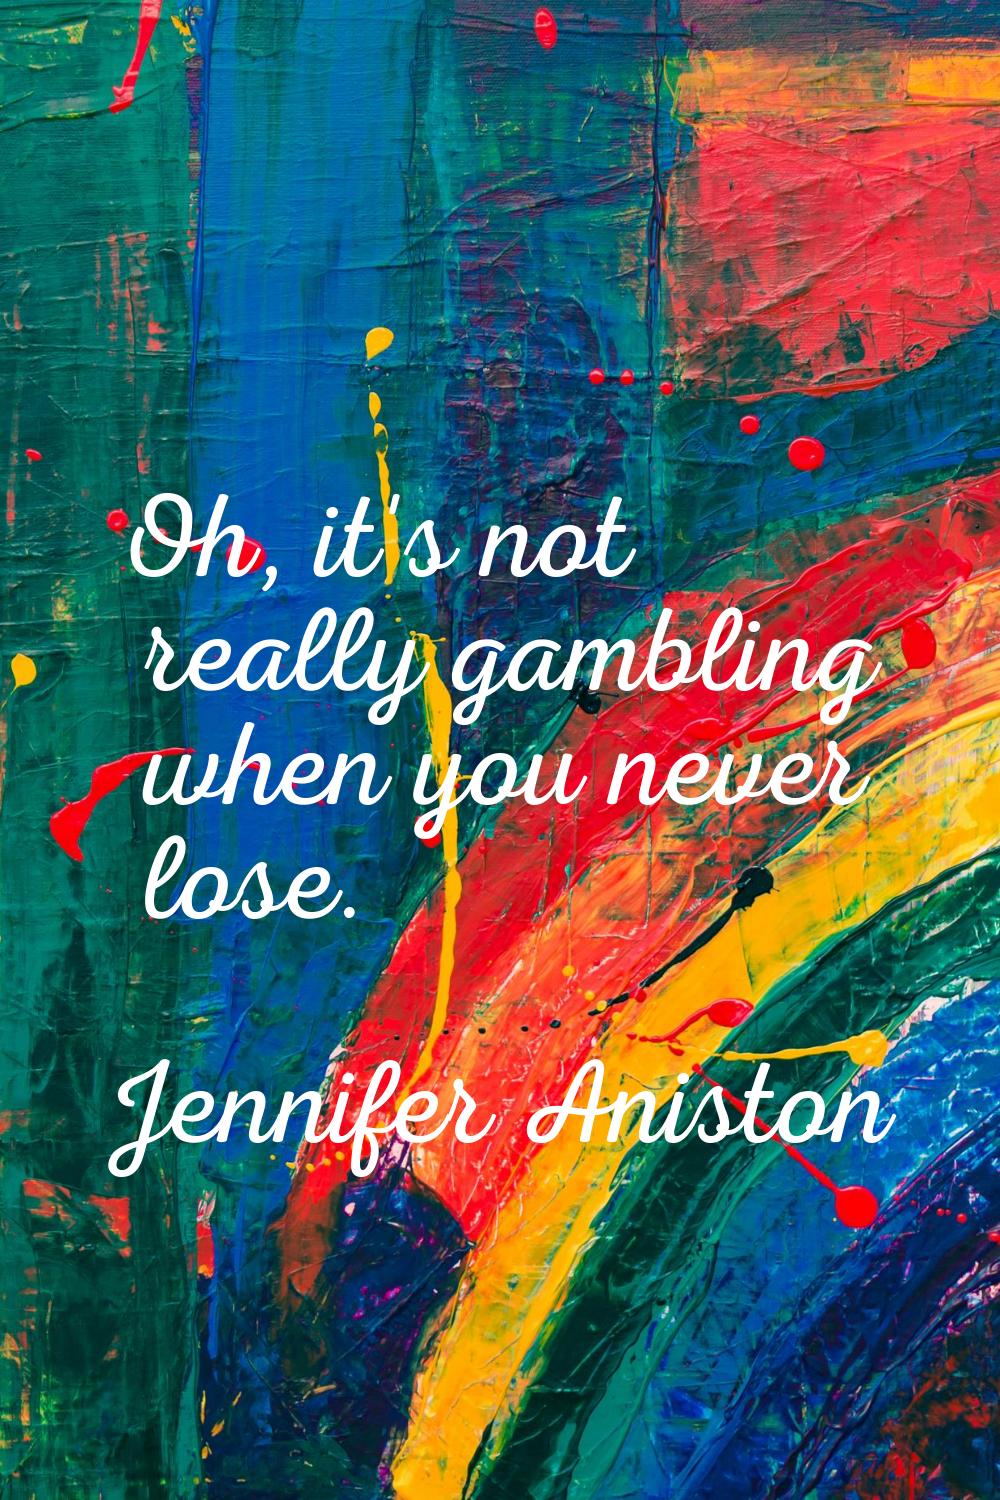 Oh, it's not really gambling when you never lose.